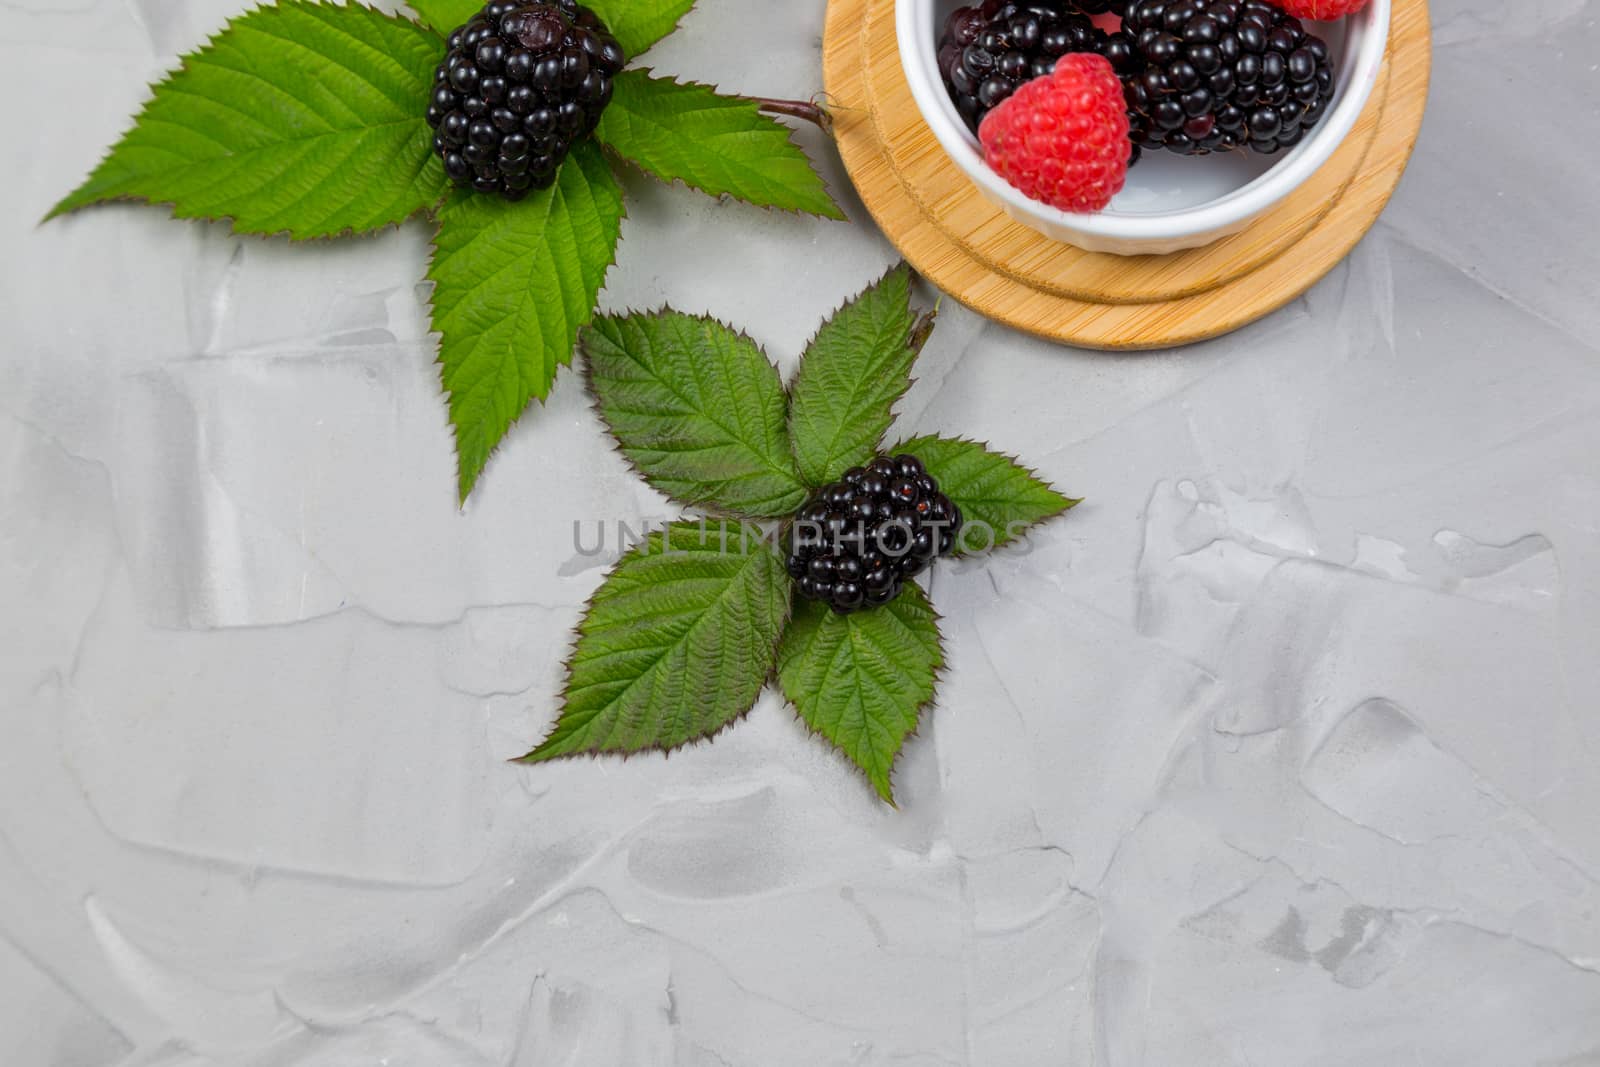 .ripe blackberry with leaves on a wooden cutting board in a white ceramic plate on concrete background place for text